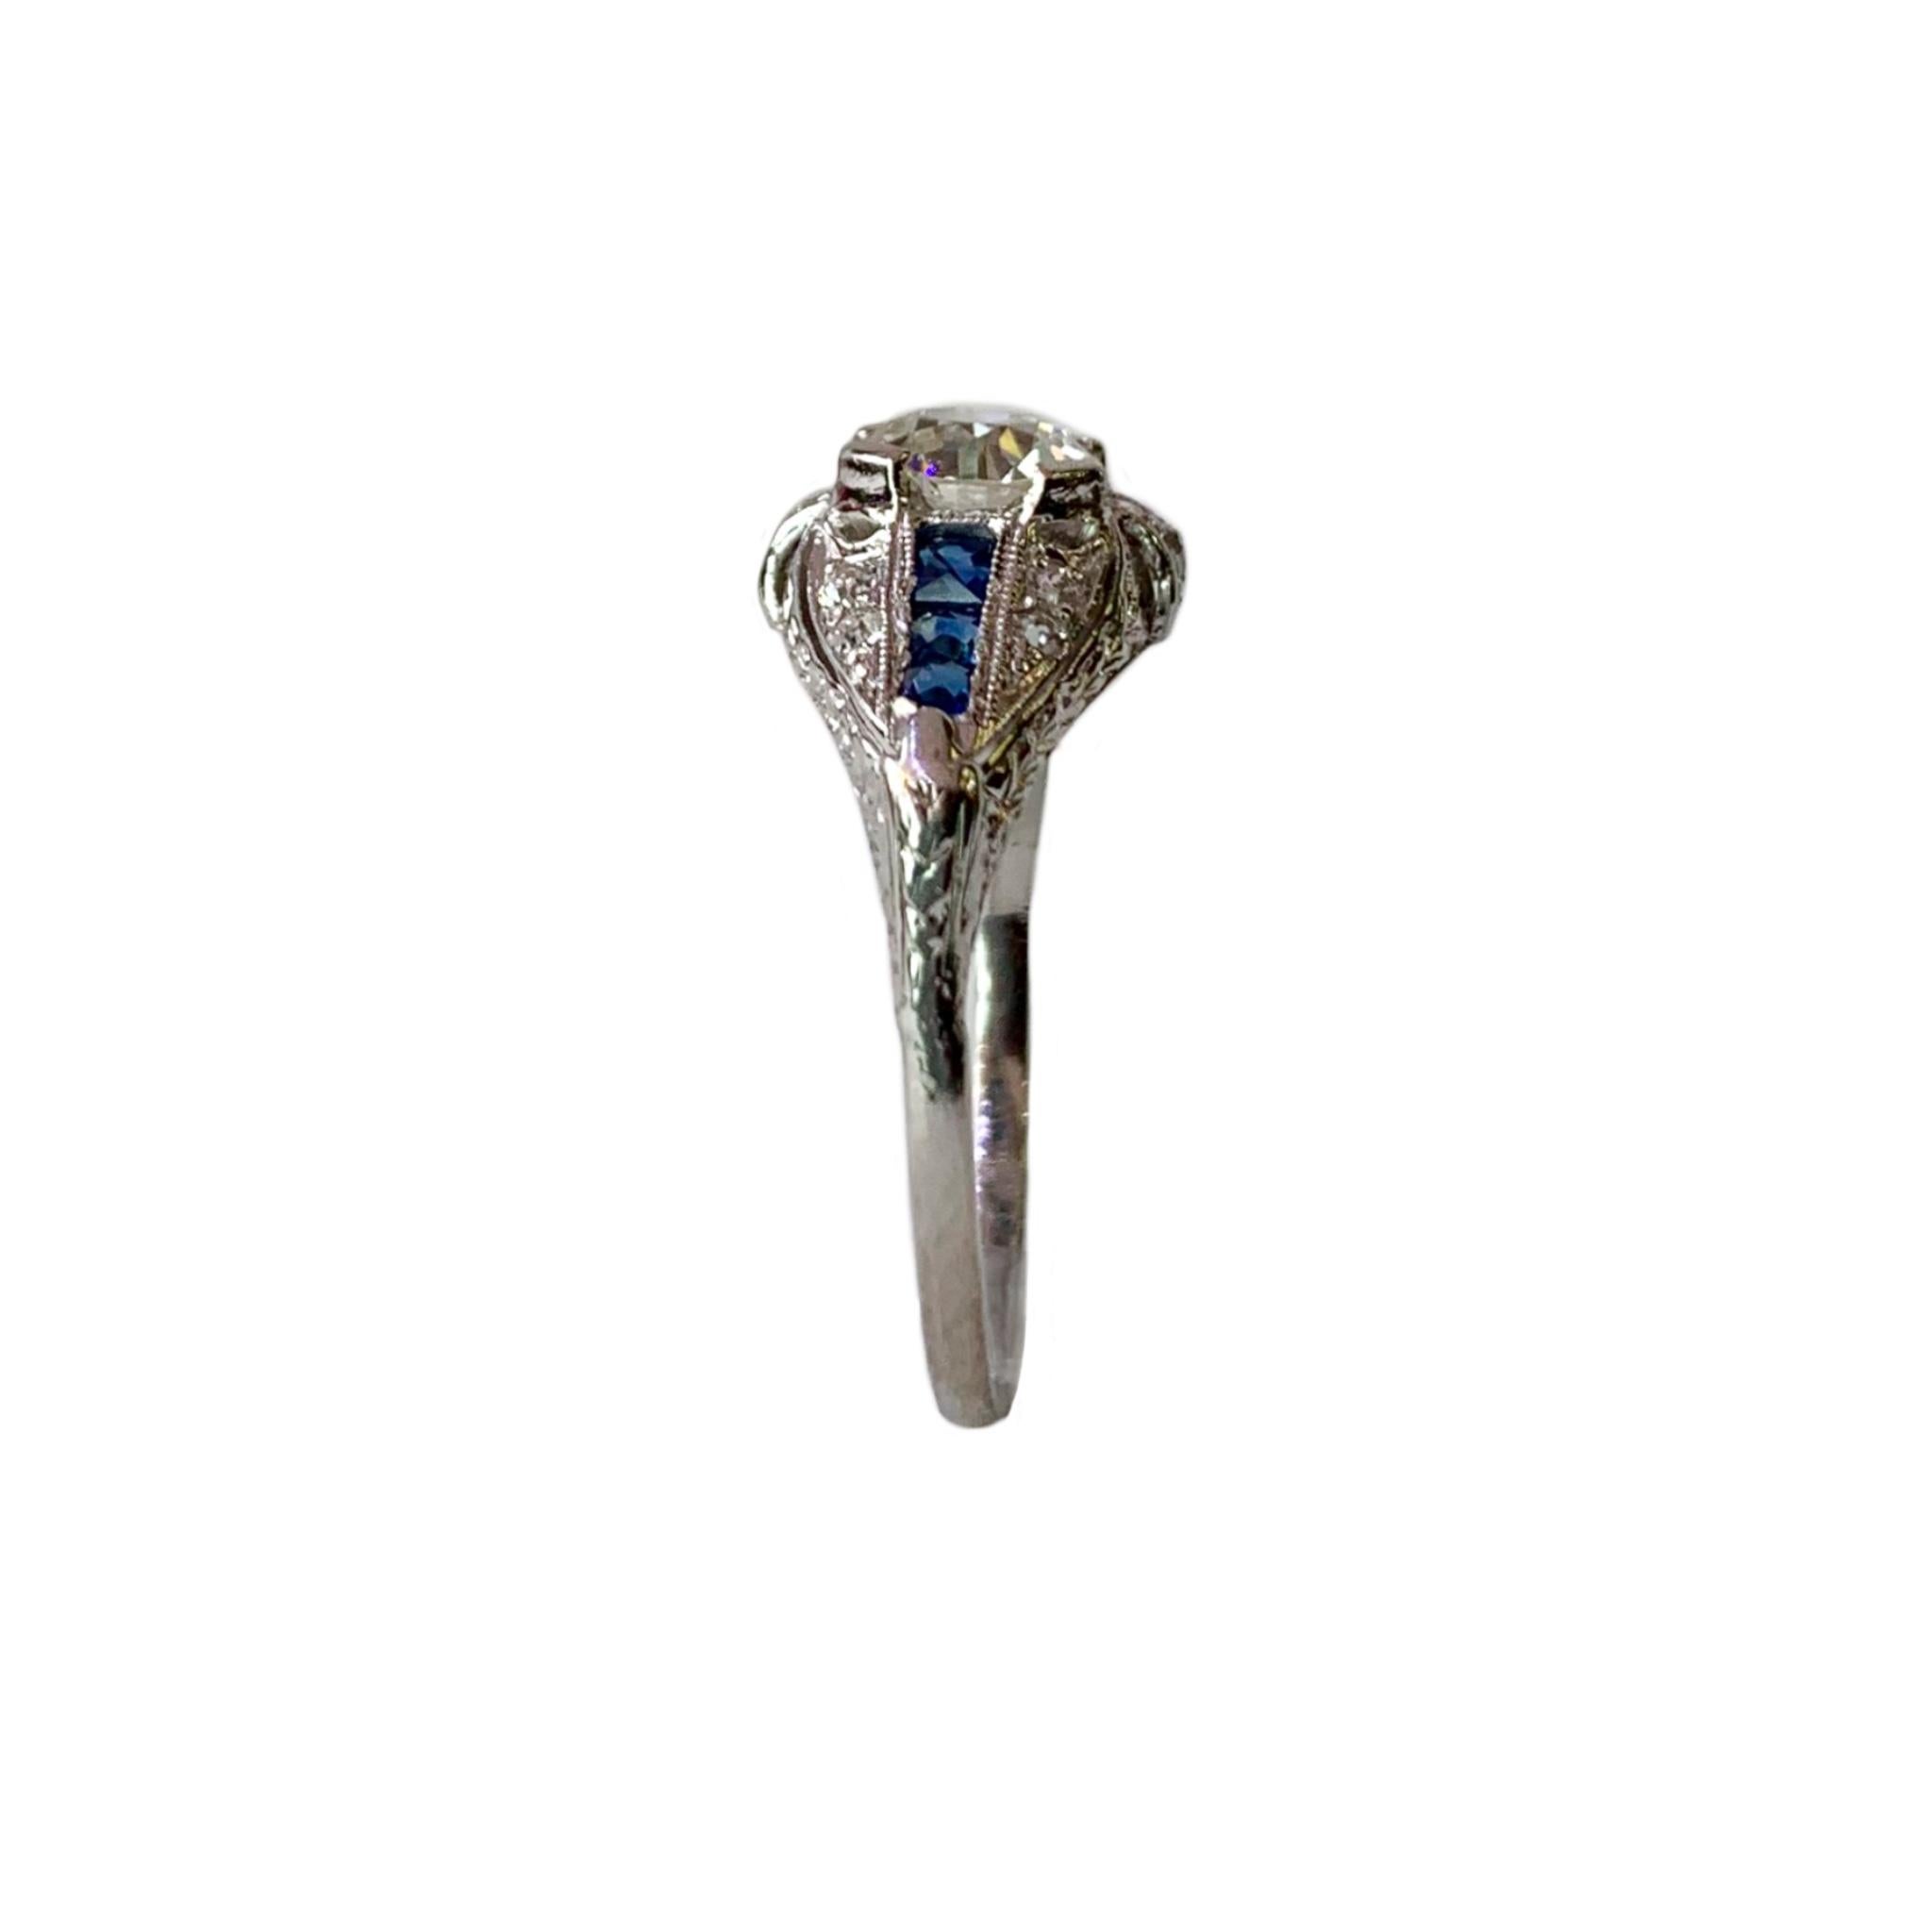 Stunning Art Deco platinum ring with 1.02ct old mine cut diamond, SI1 clarity, J-K color and twelve old European cut diamonds total weight approximately .15cts, and six square French cut blue sapphires.